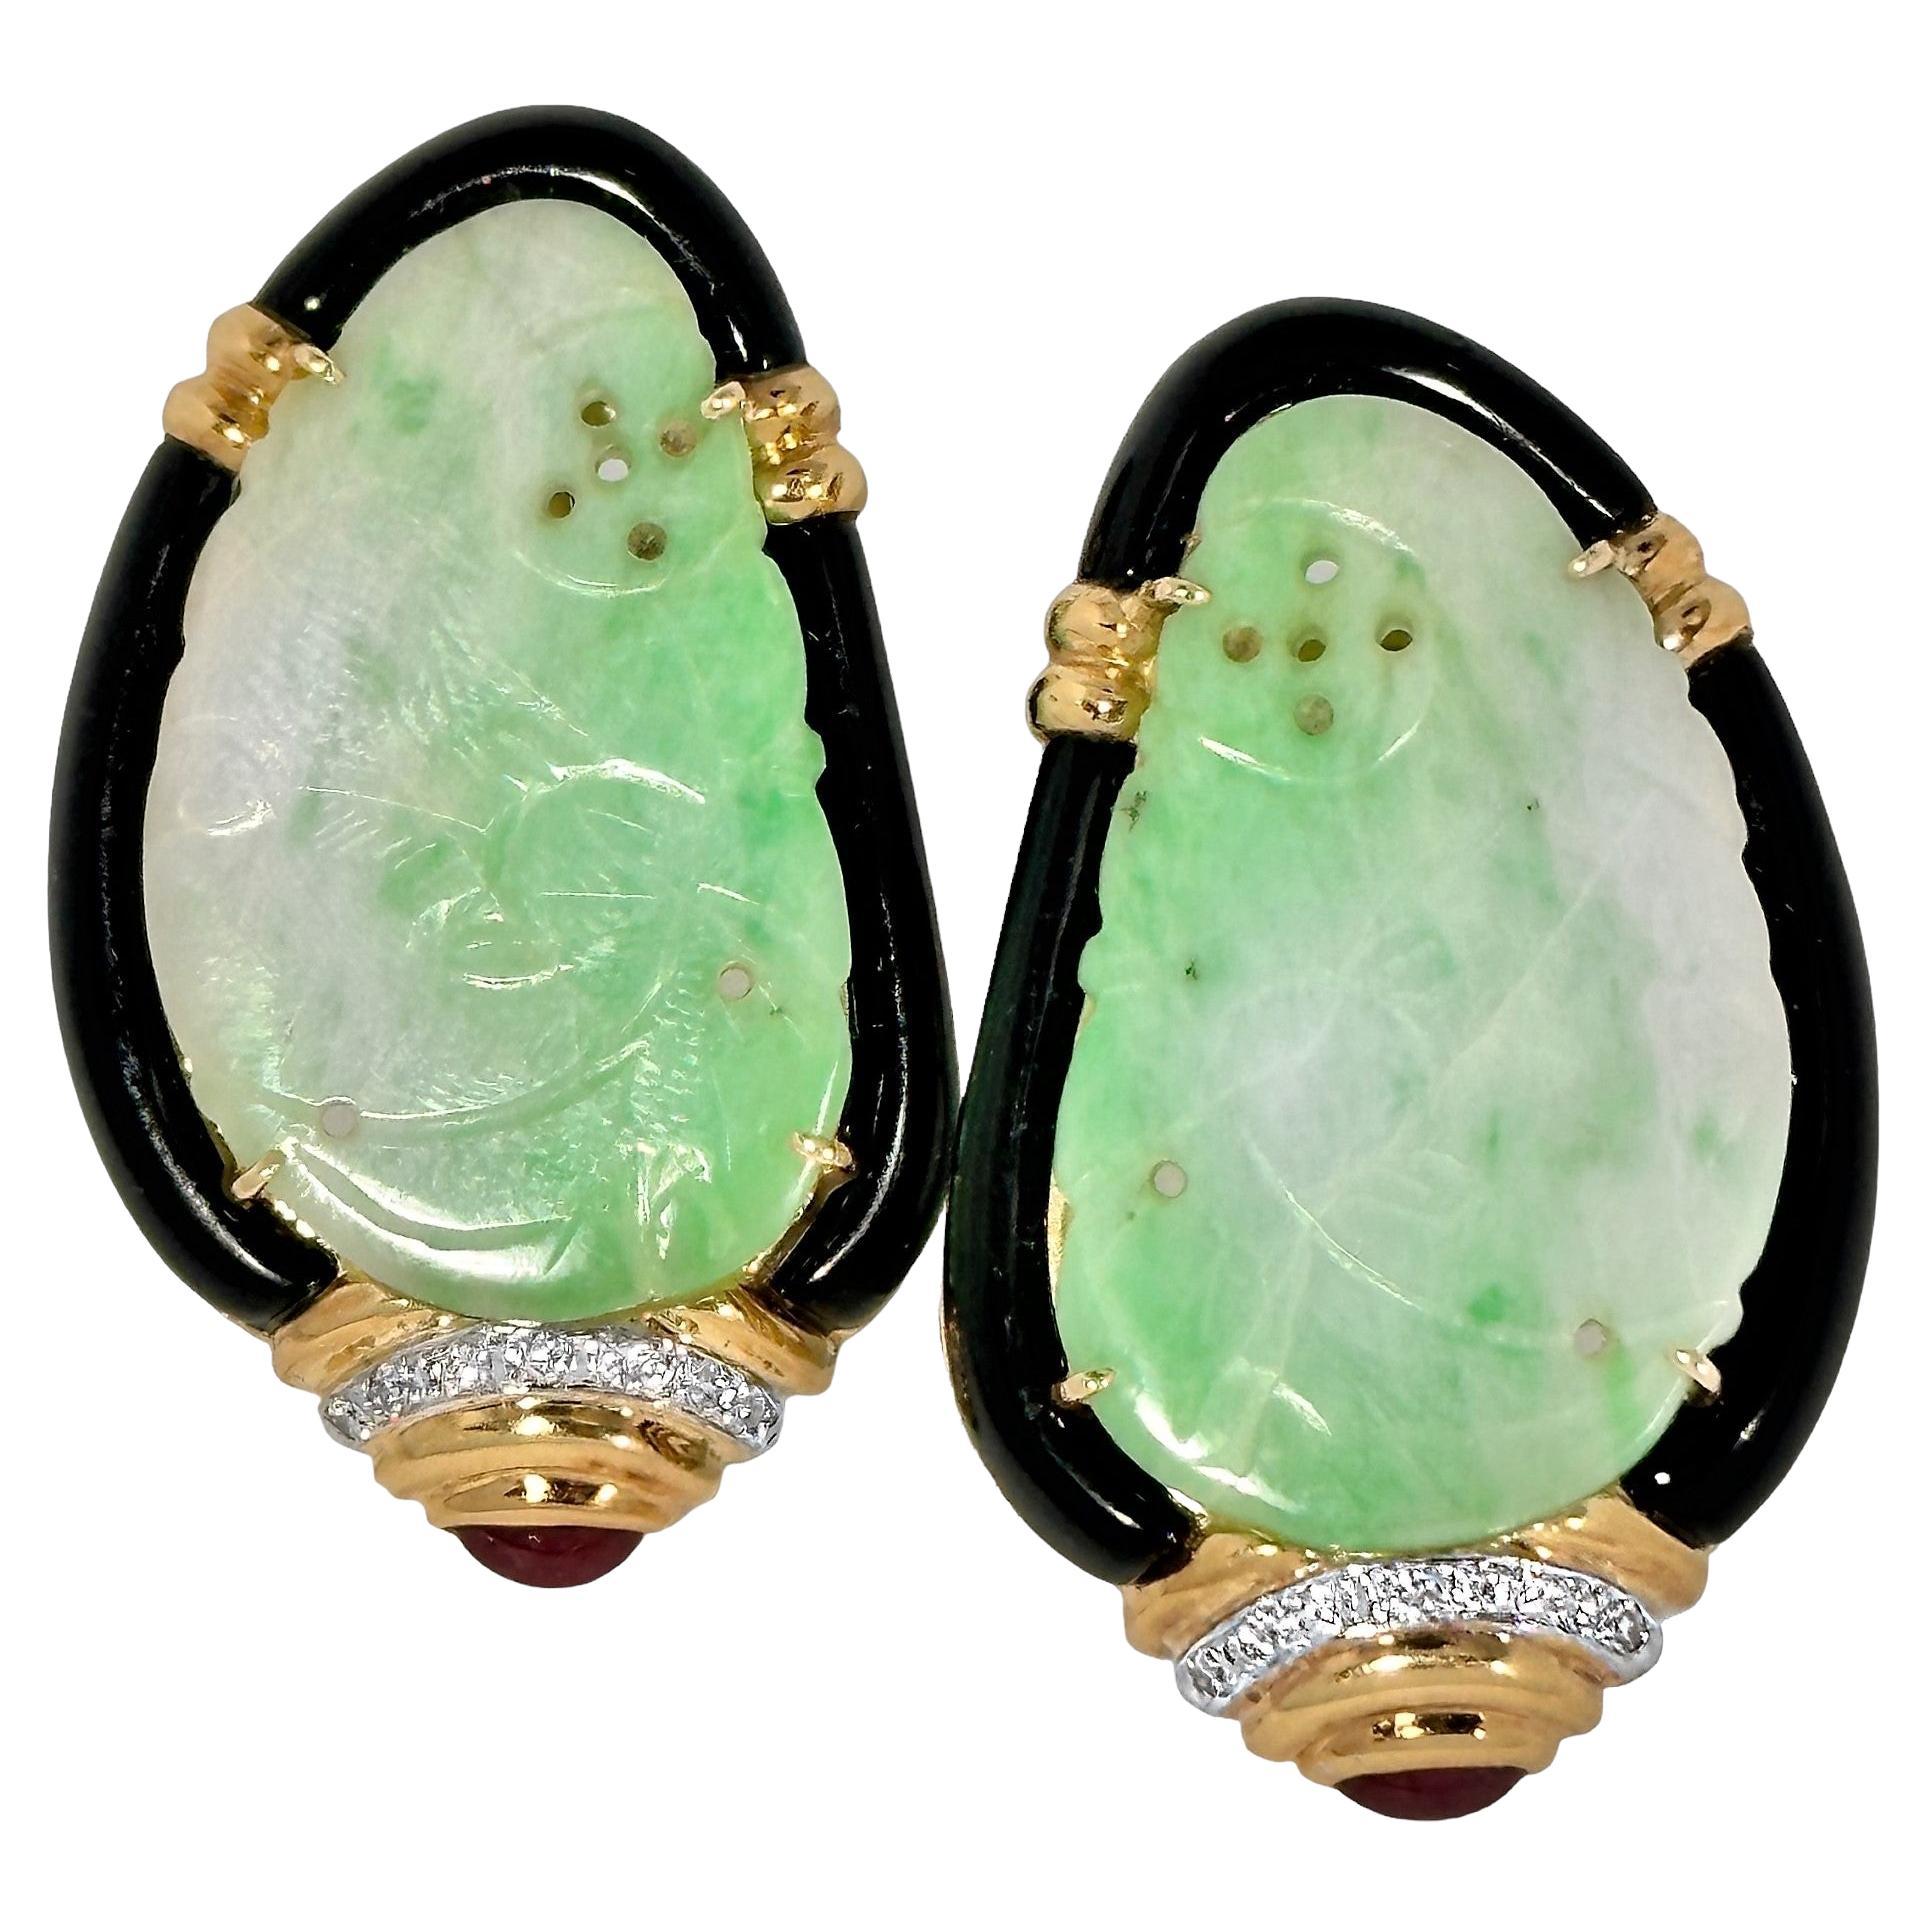 Grand Scale 18k Yellow Gold, Jadeite Jade, Ruby, Diamond and Onyx Earrings For Sale